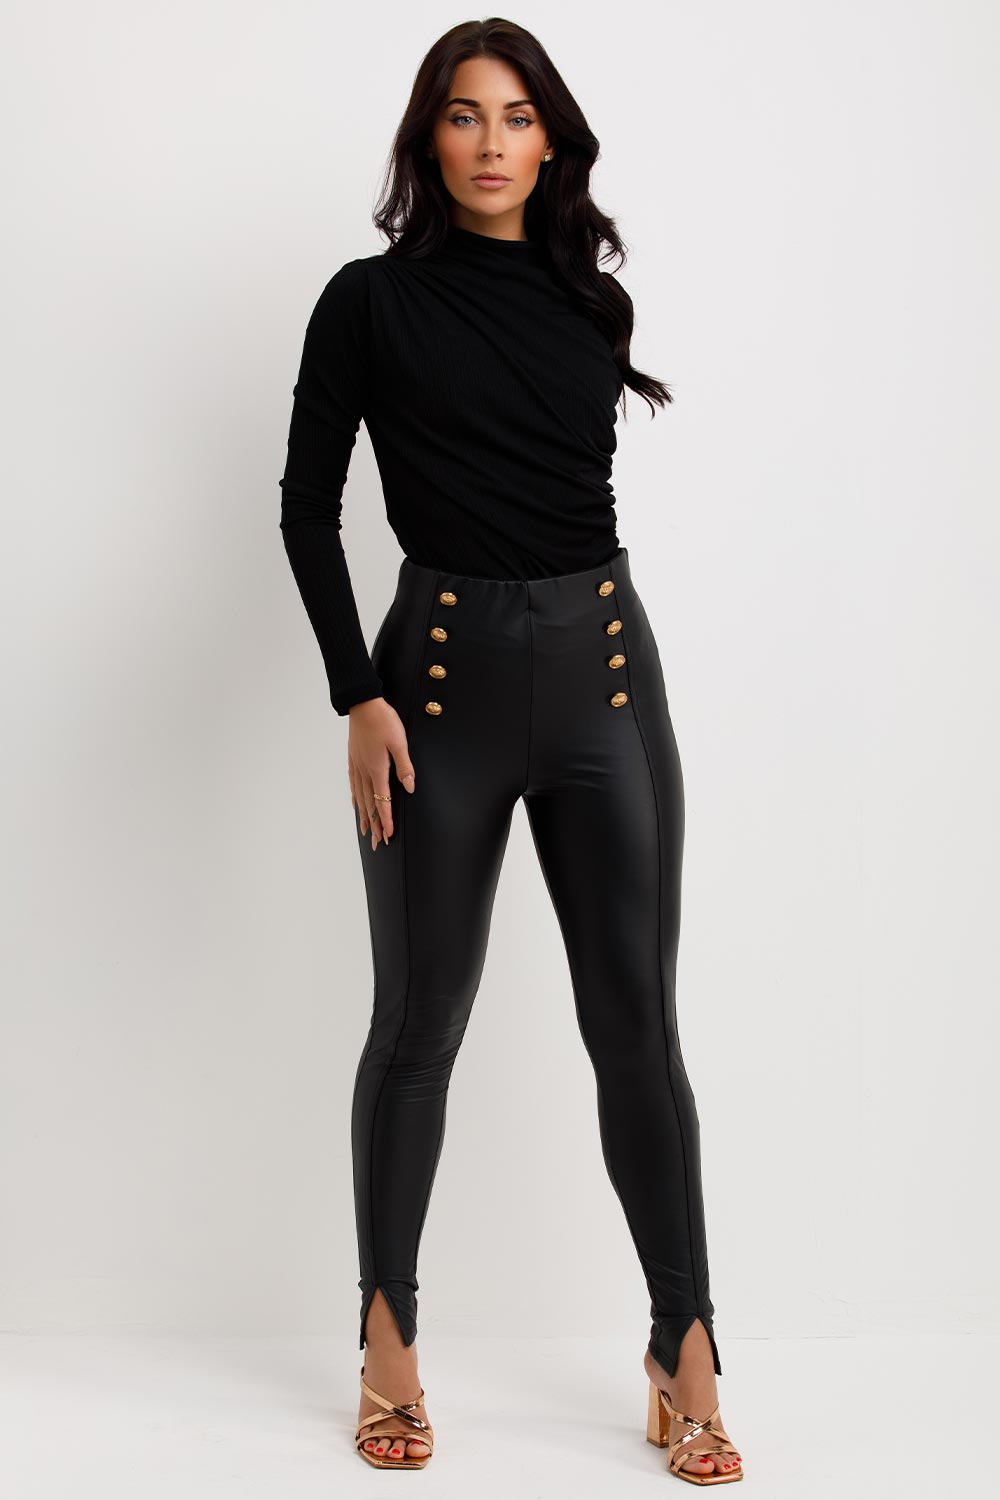 black long sleeve going out bodysuit top